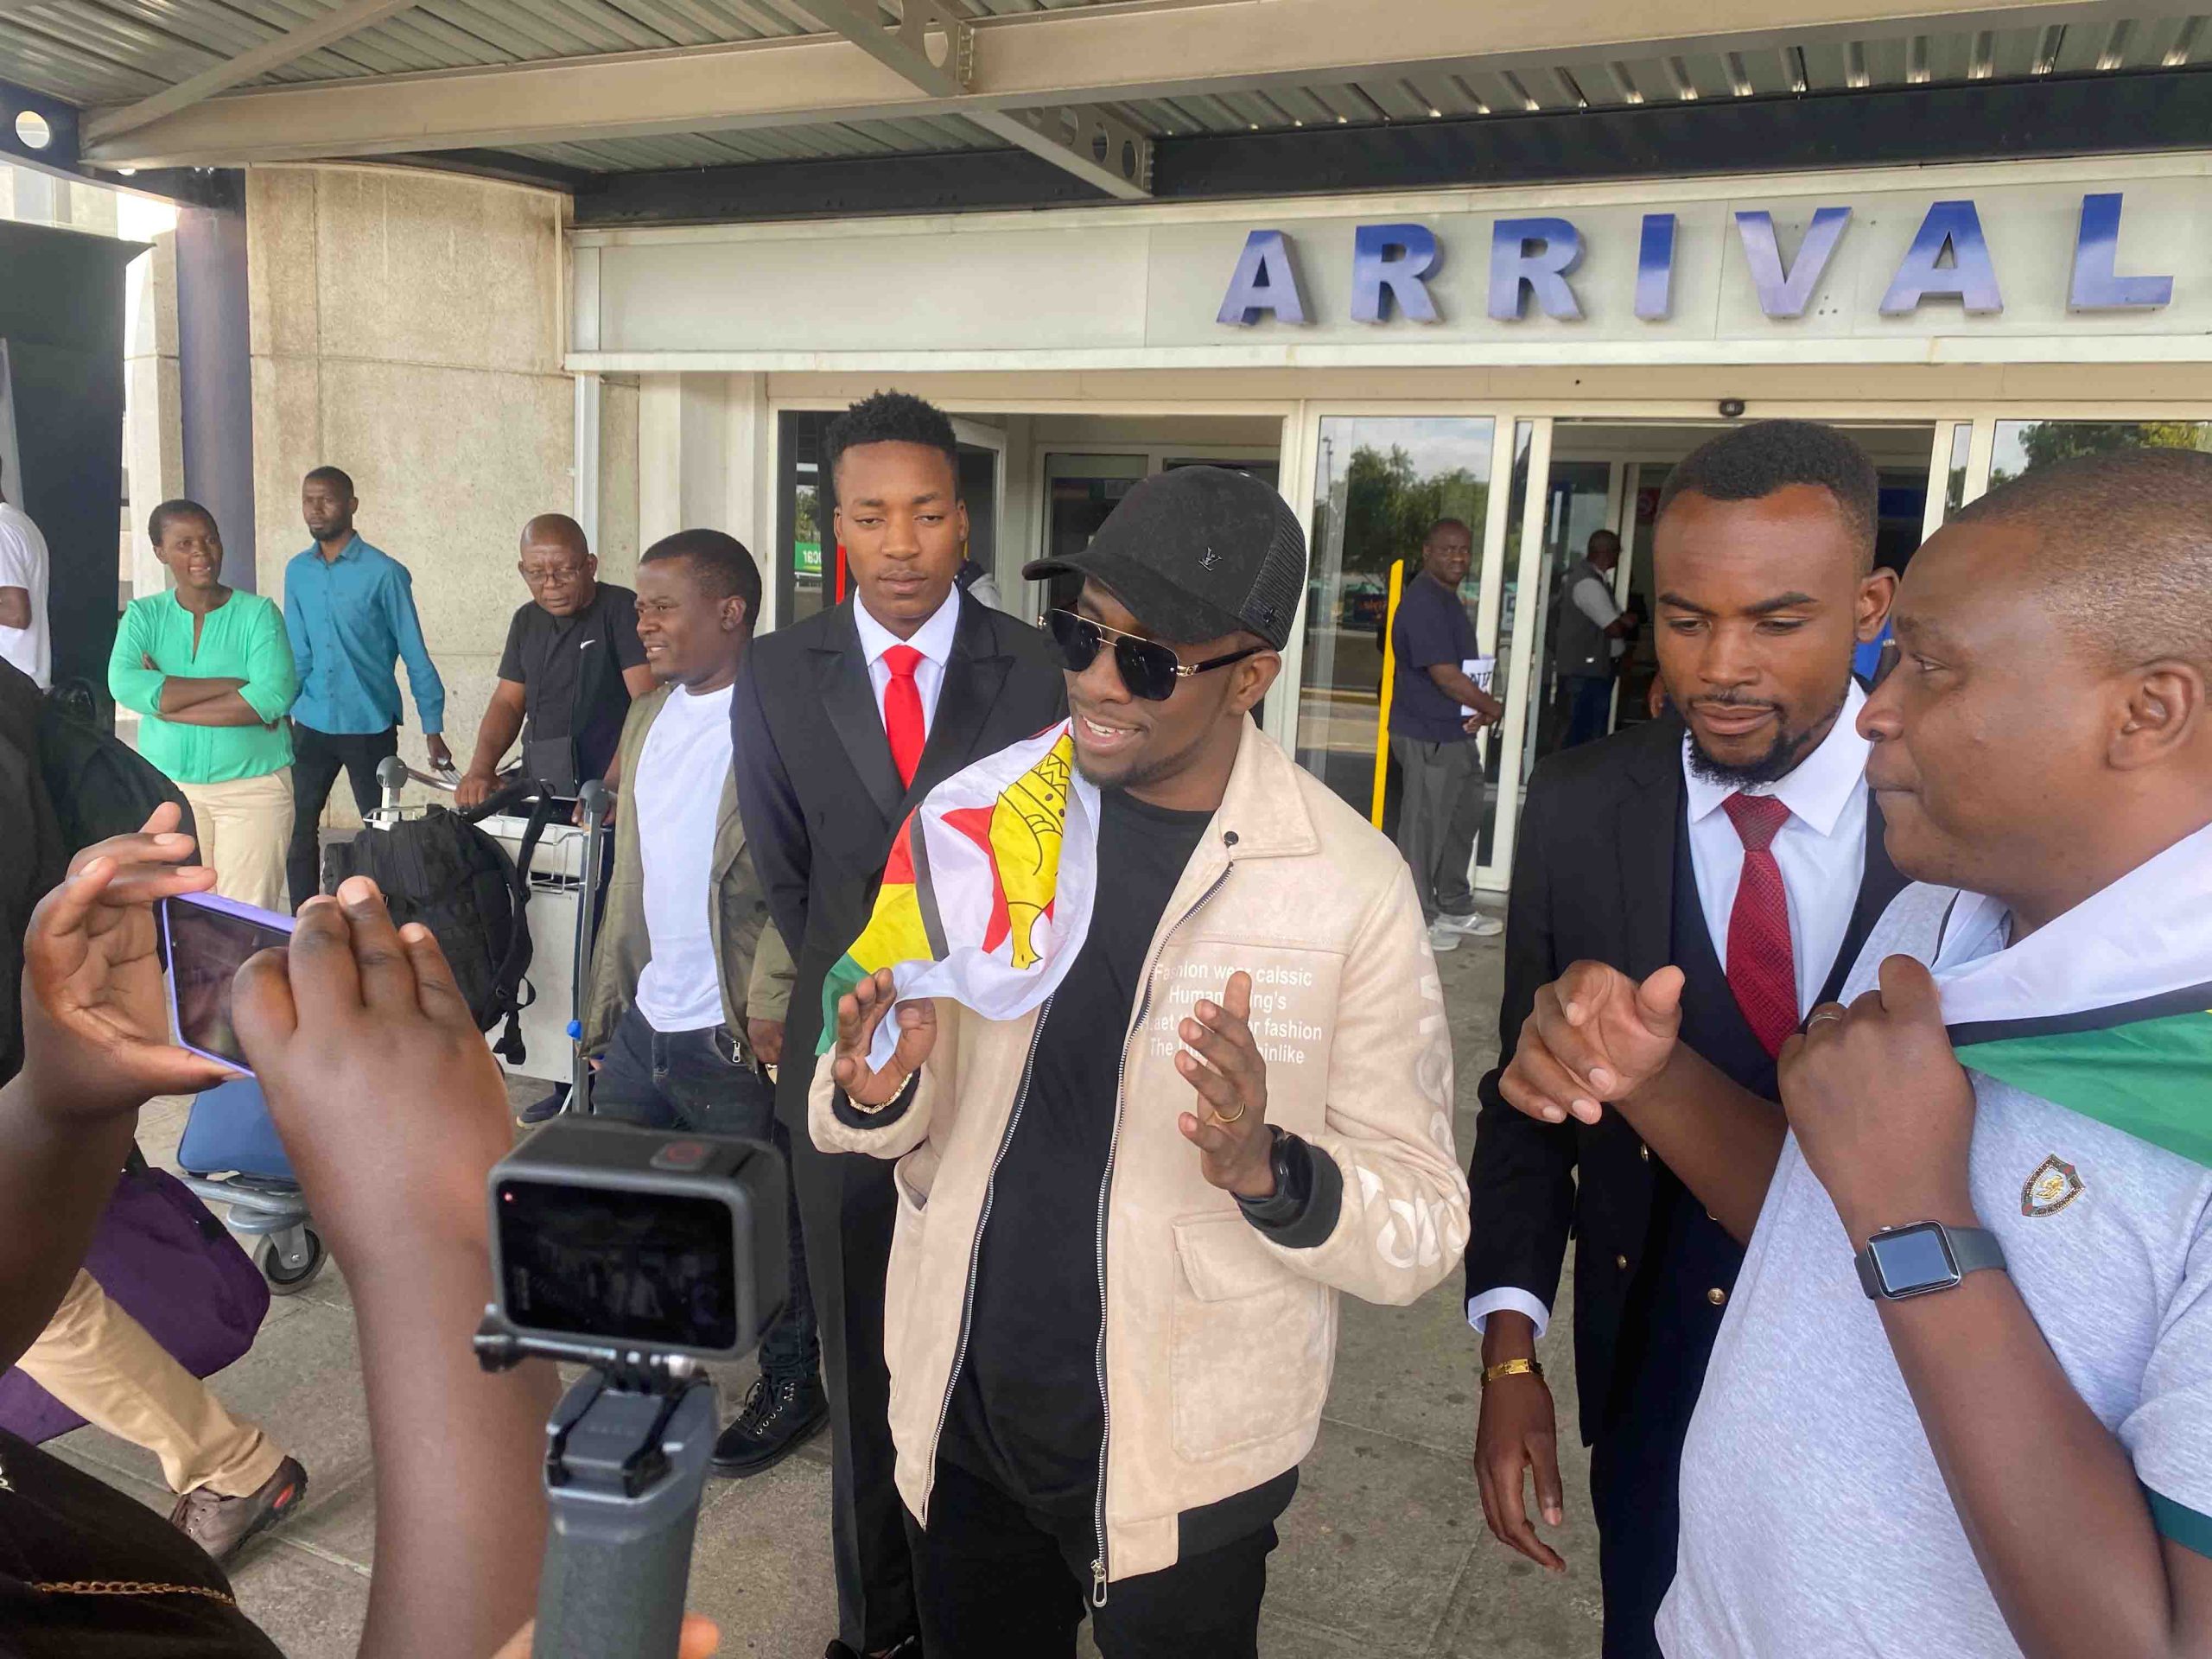 Minister GUC Arrives in Harare for Maiden Show on Zimbabwe’s Independence Day, Ready to worship at the Belgravia Sports Club